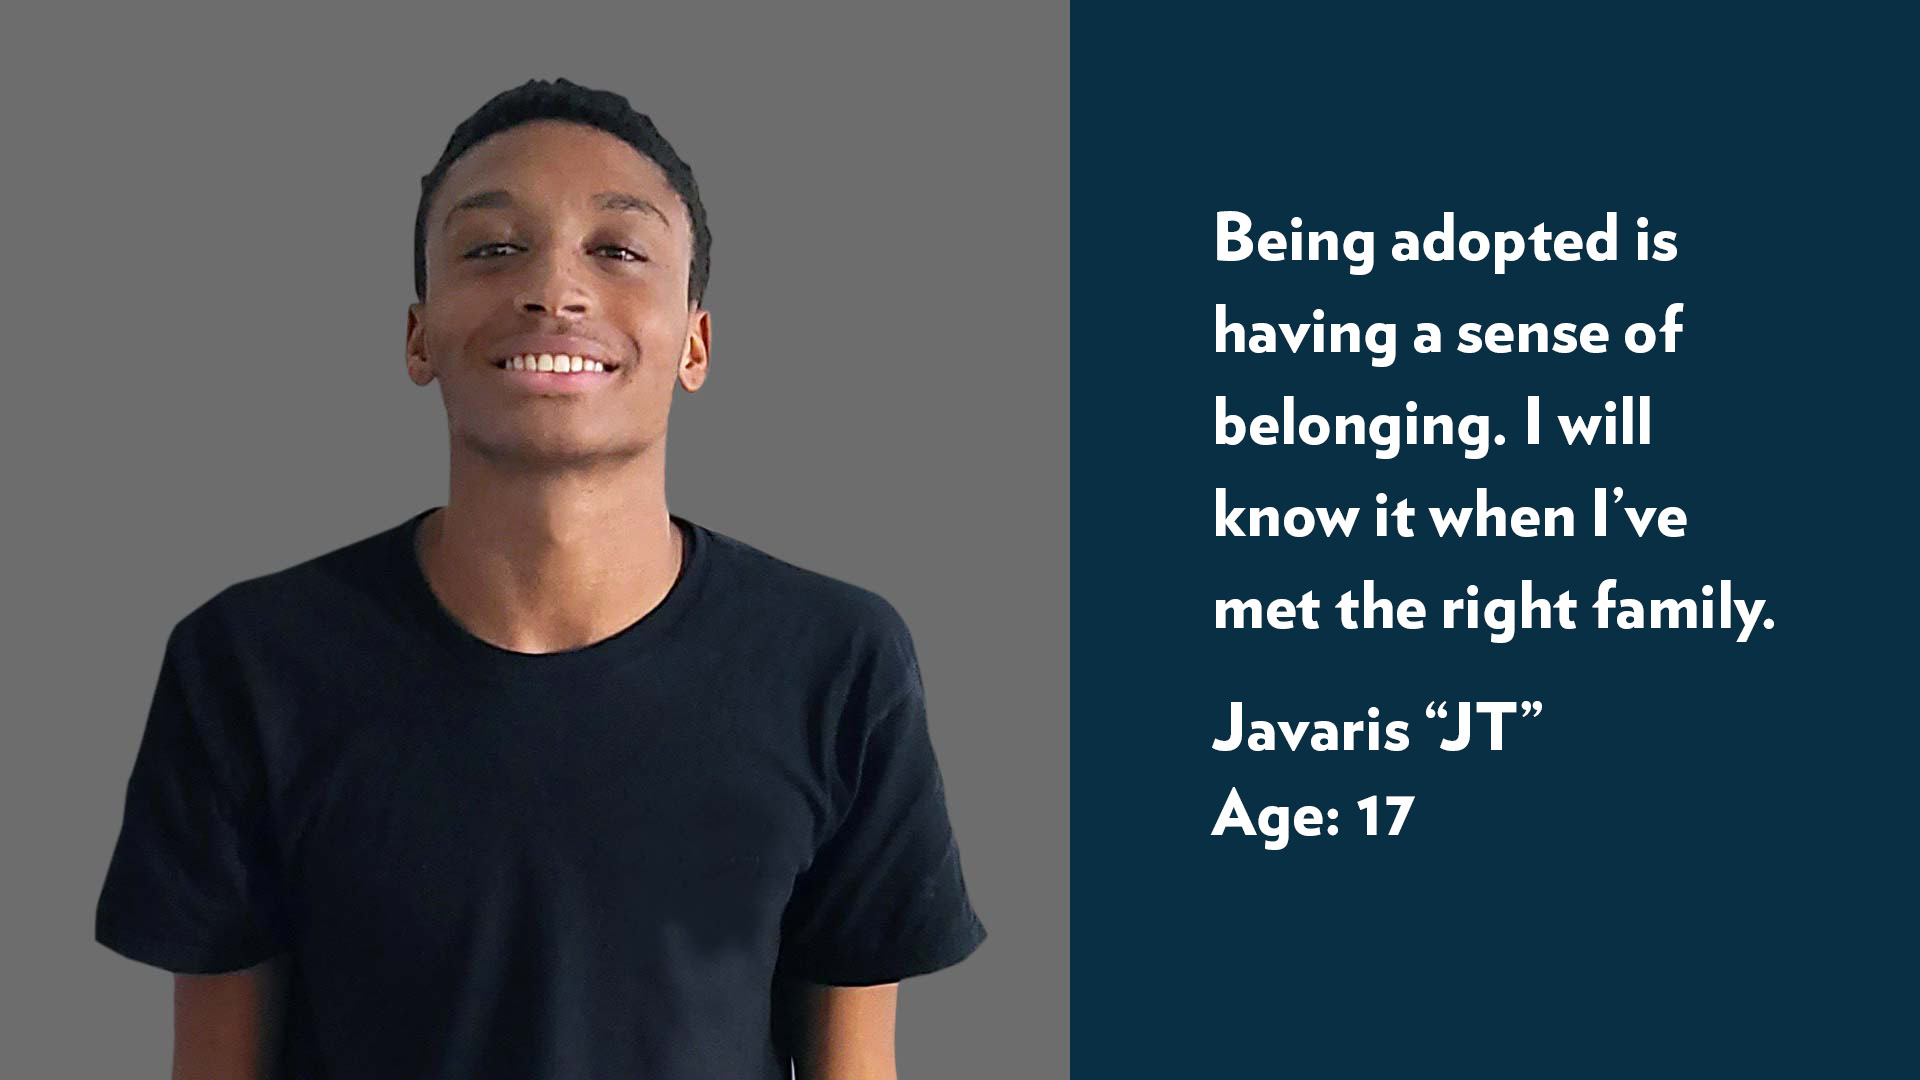 Javaris (JT), age 16. Being adopted is having a sense of belonging. I will know it when I’ve met the right family. 